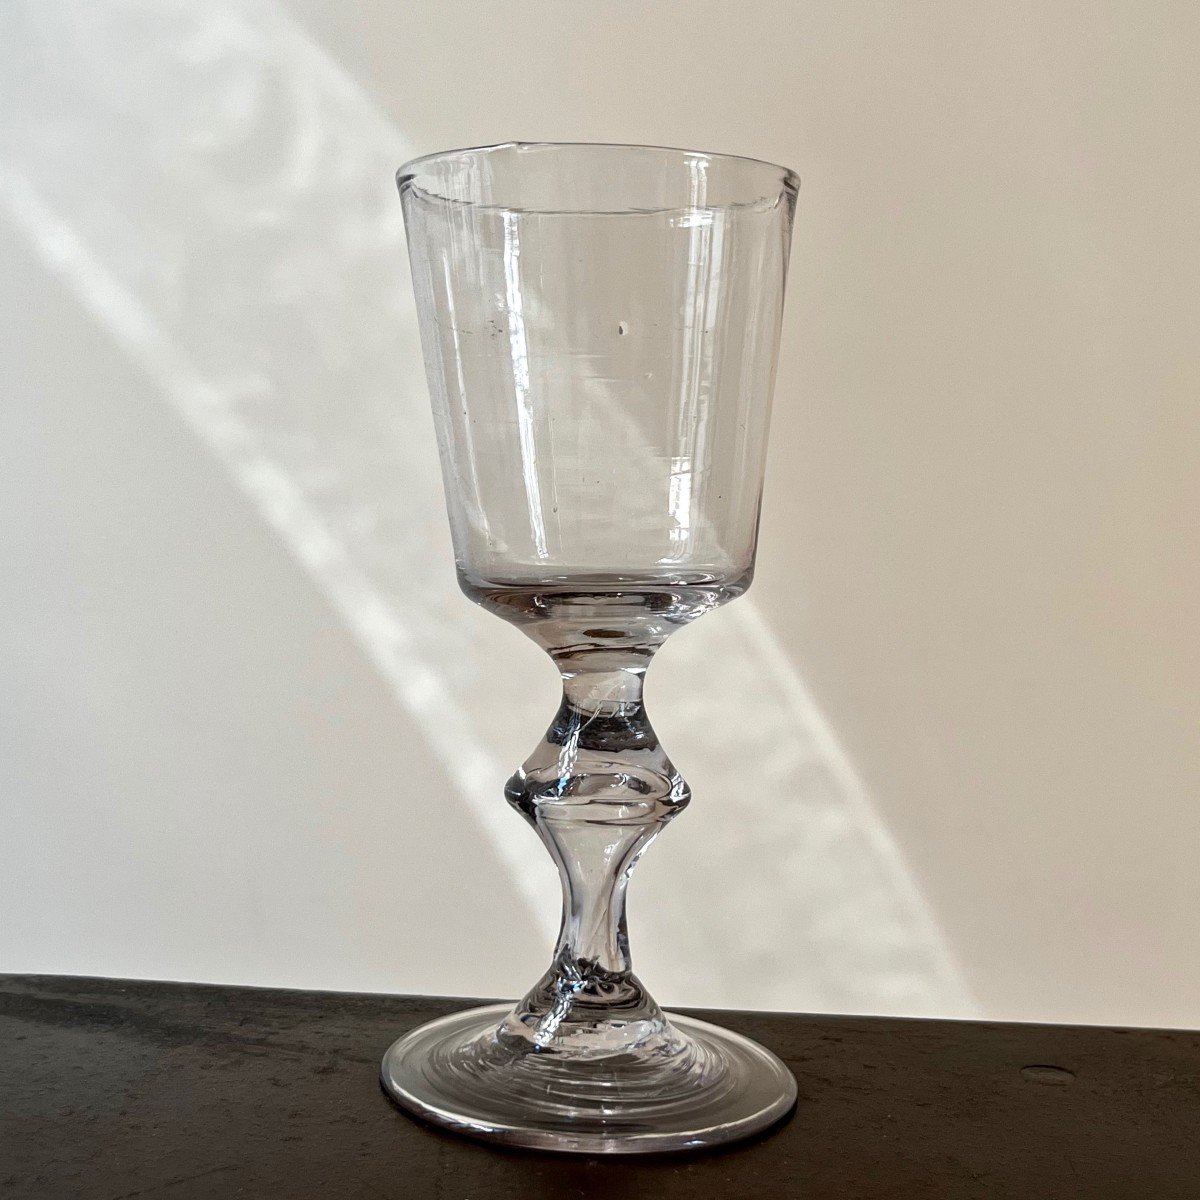 Large Burgundy Glass In Blown Glass From The 18th Century 18th